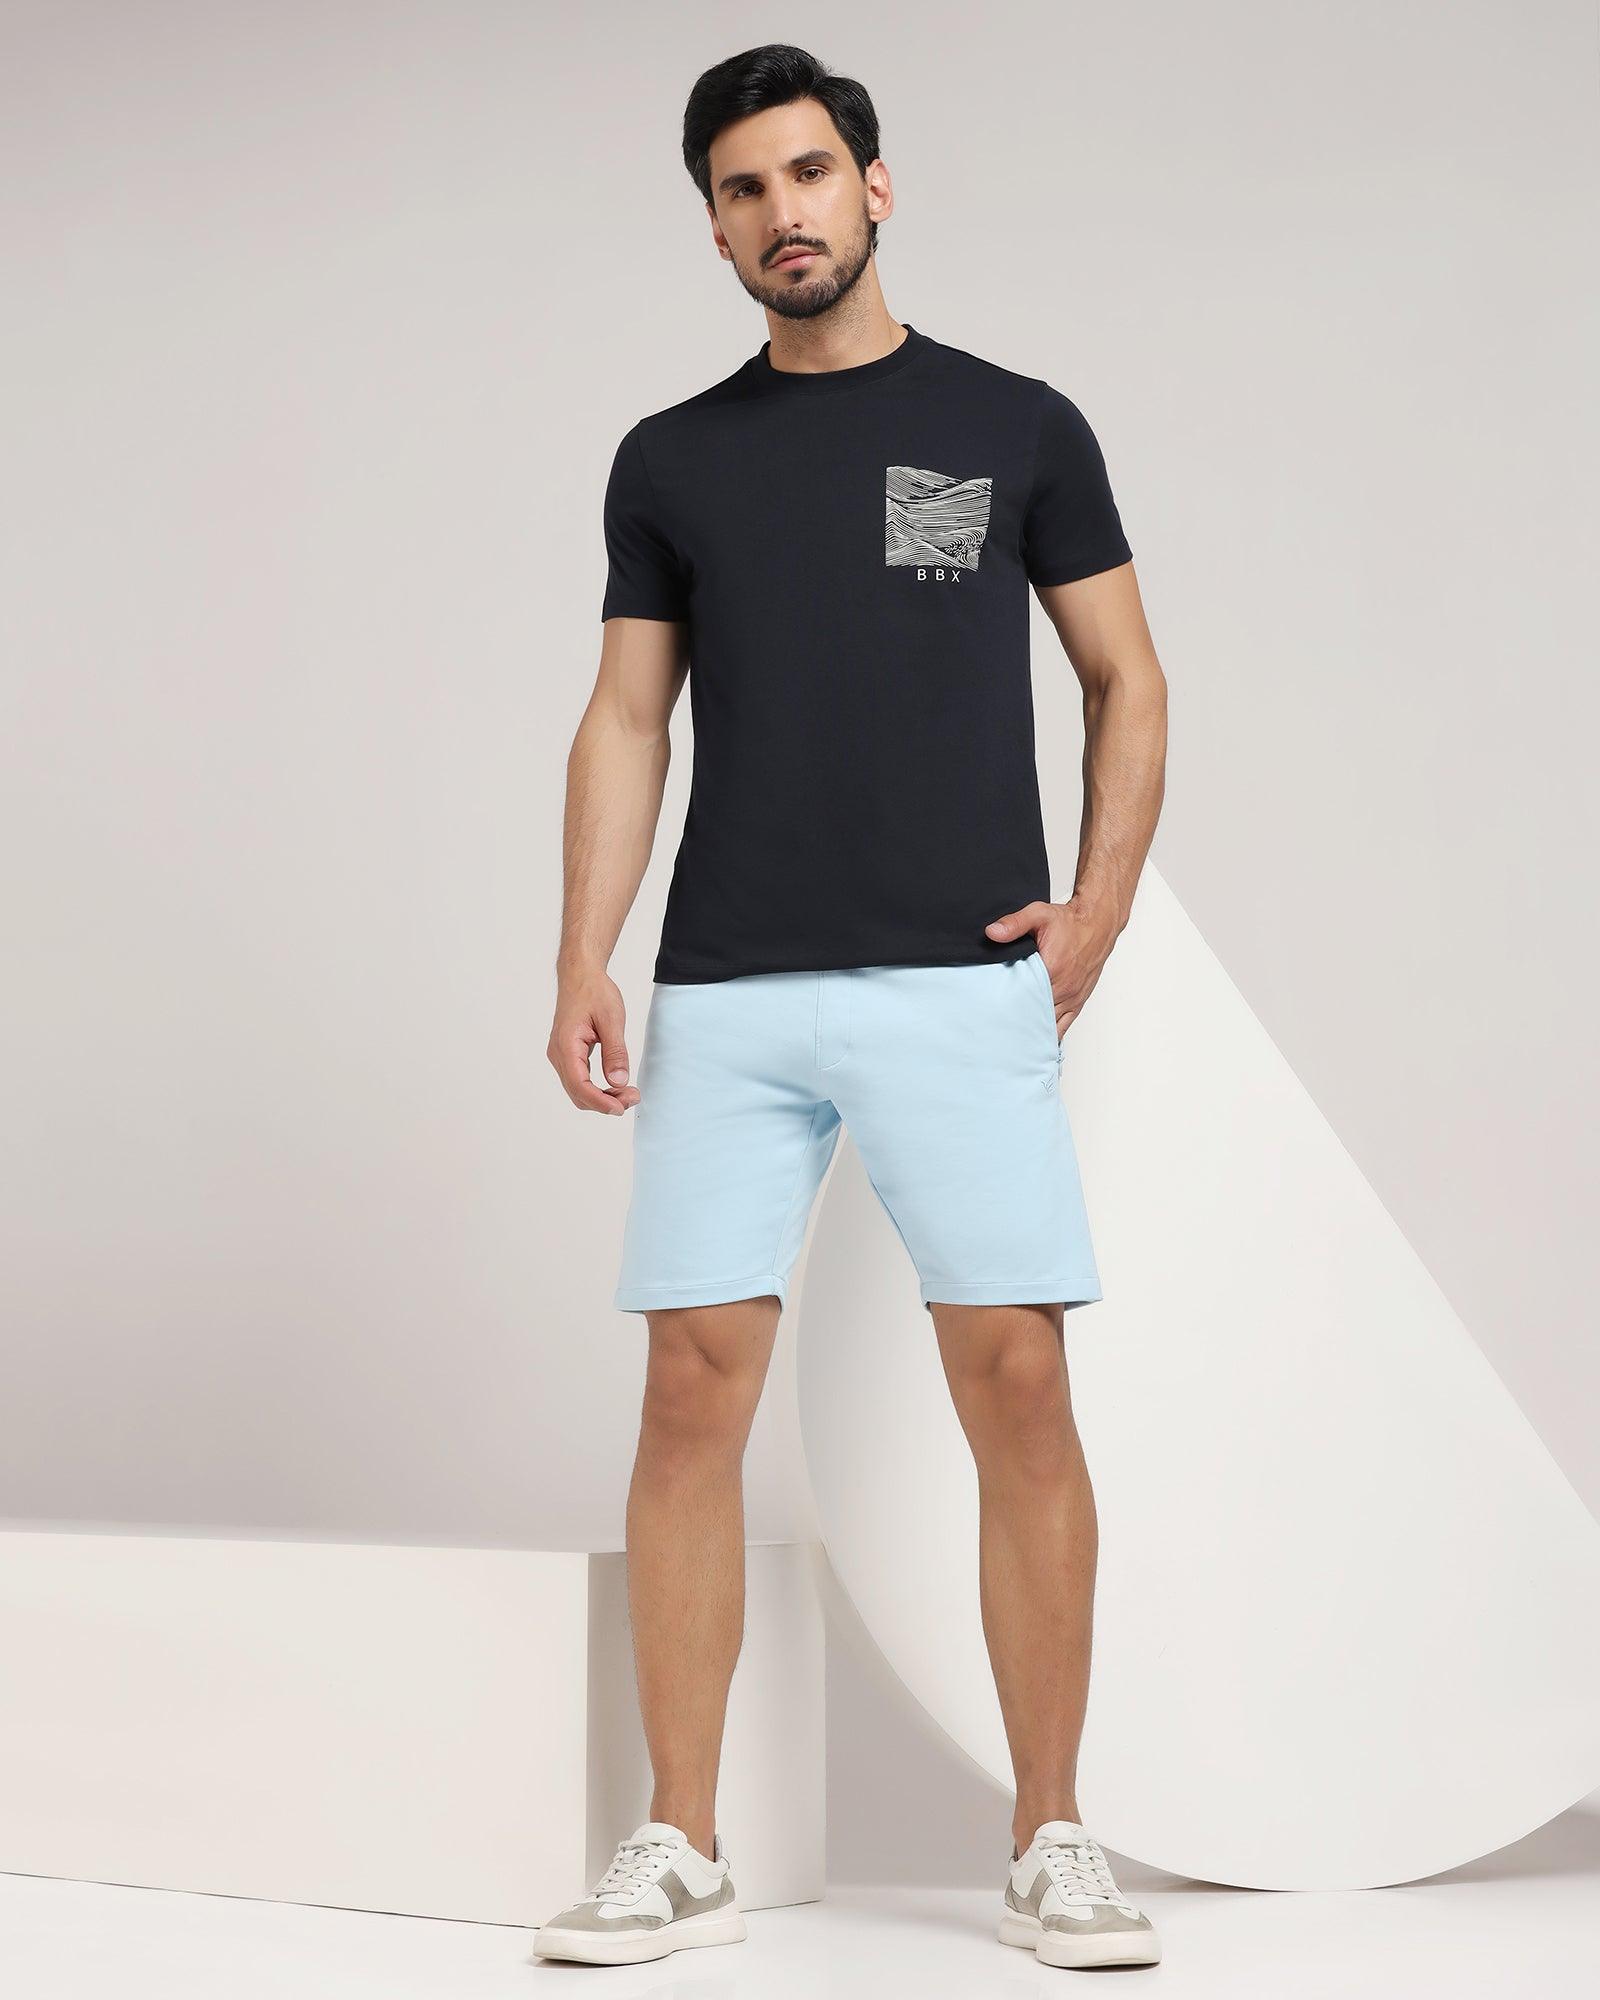 Casual Light Blue Solid Shorts - Liam